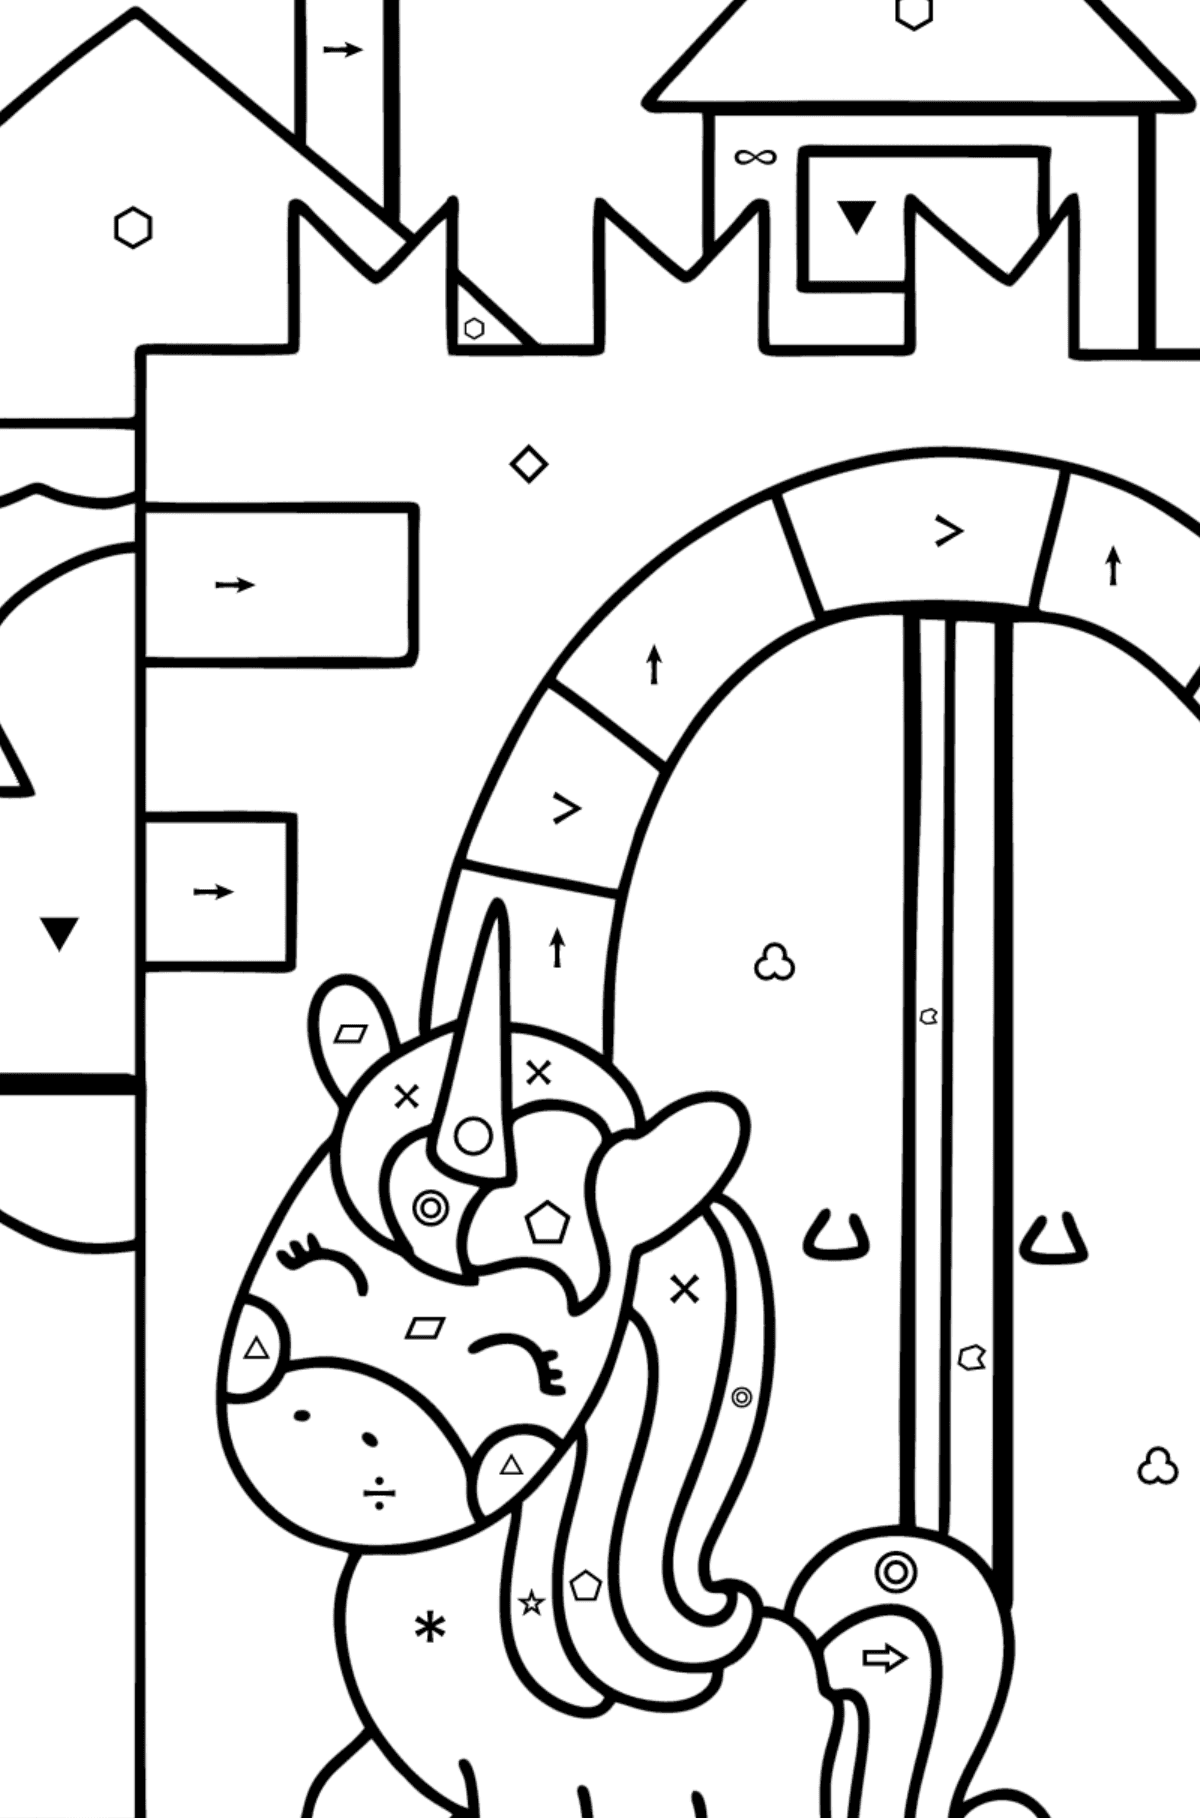 Dreamland coloring page - Coloring by Symbols and Geometric Shapes for Kids